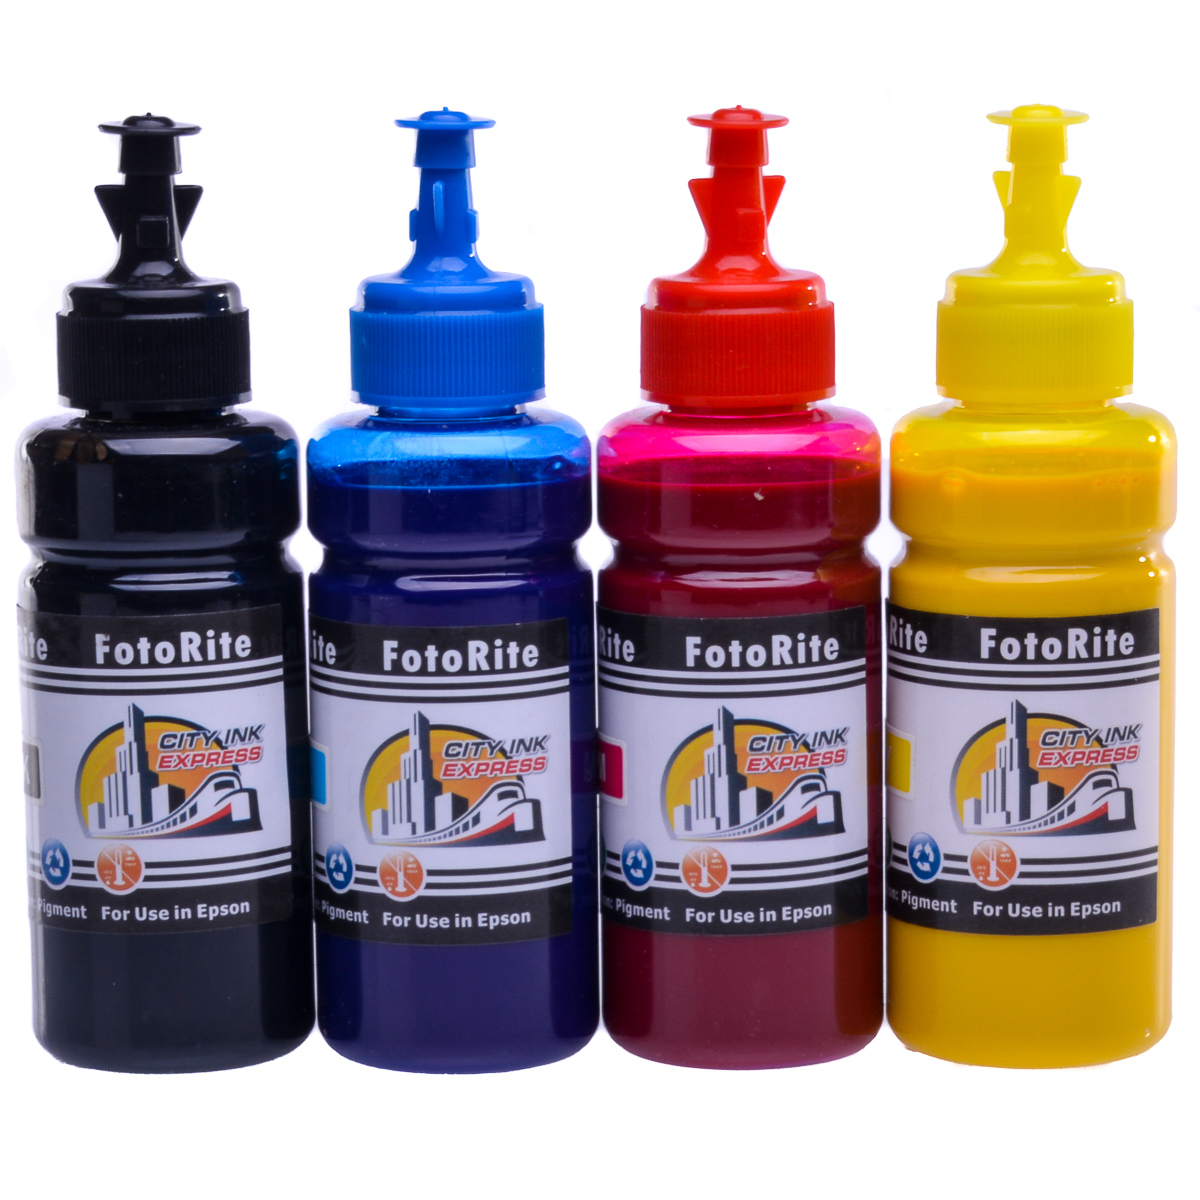 Cheap Multipack pigment ink refill replaces Epson WF-3820DWF